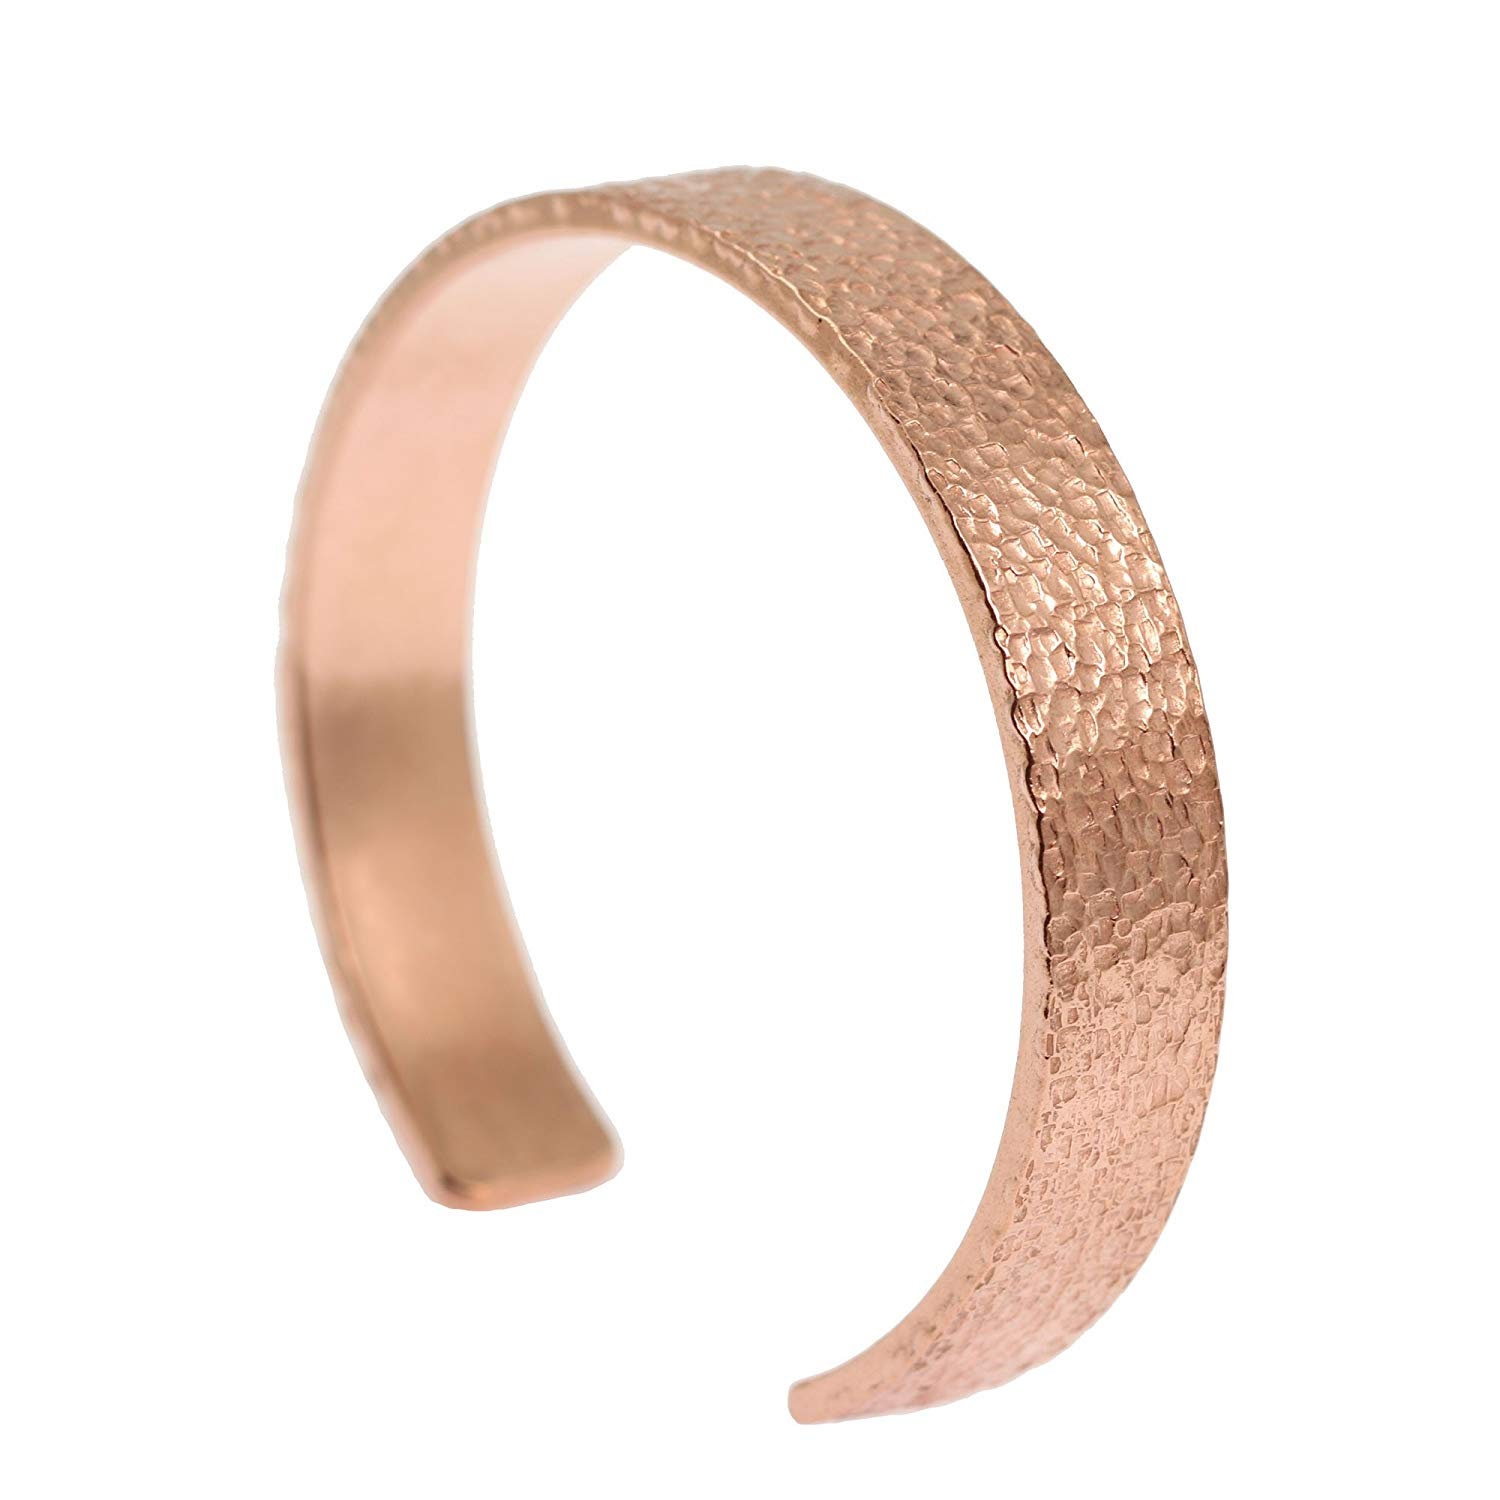 10mm Wide Hammered Copper Cuff Bracelet By John Brana Handmade Jewelry 100% Uncoated Solid Copper Cuff